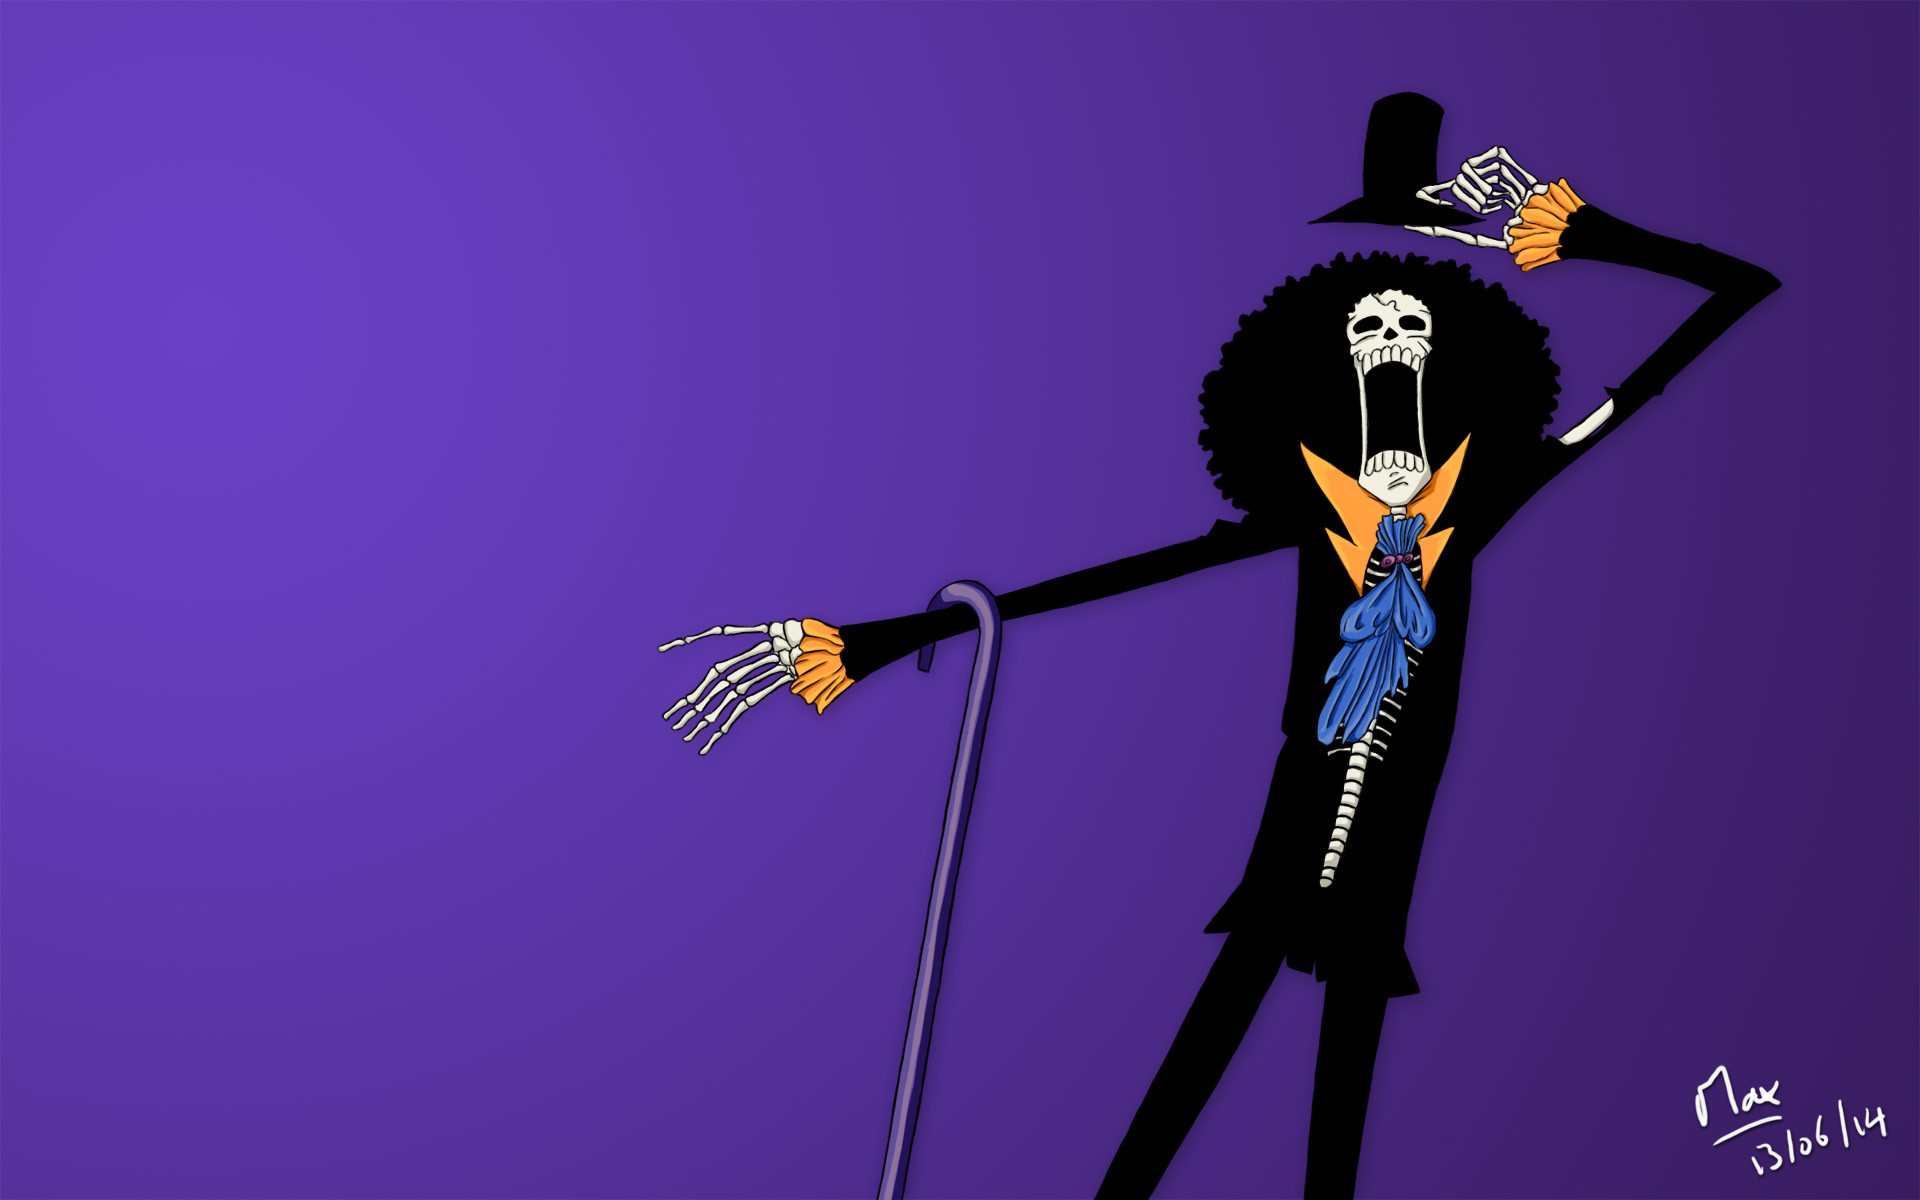 brook wallpaper,performance,singer,microphone stand,event,fictional character